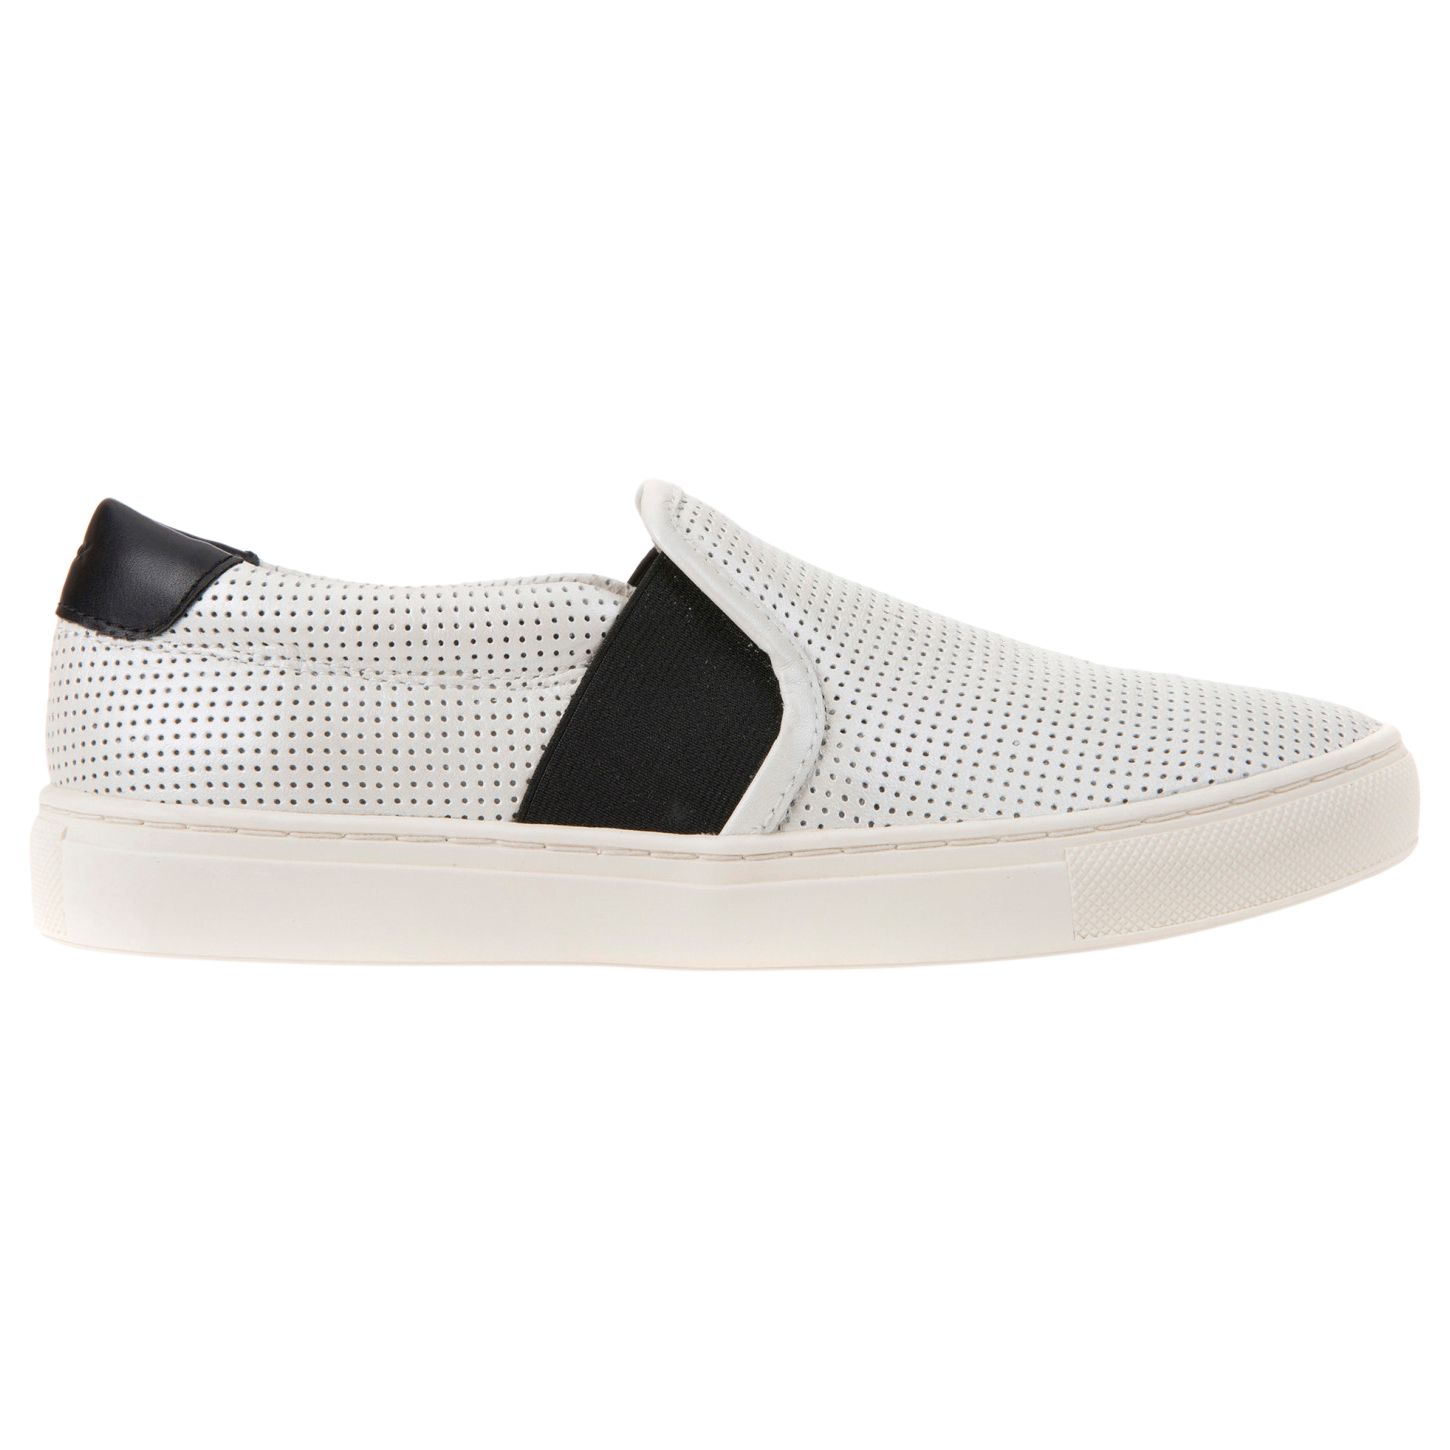 Geox Trysure Leather Slip On Trainers, White